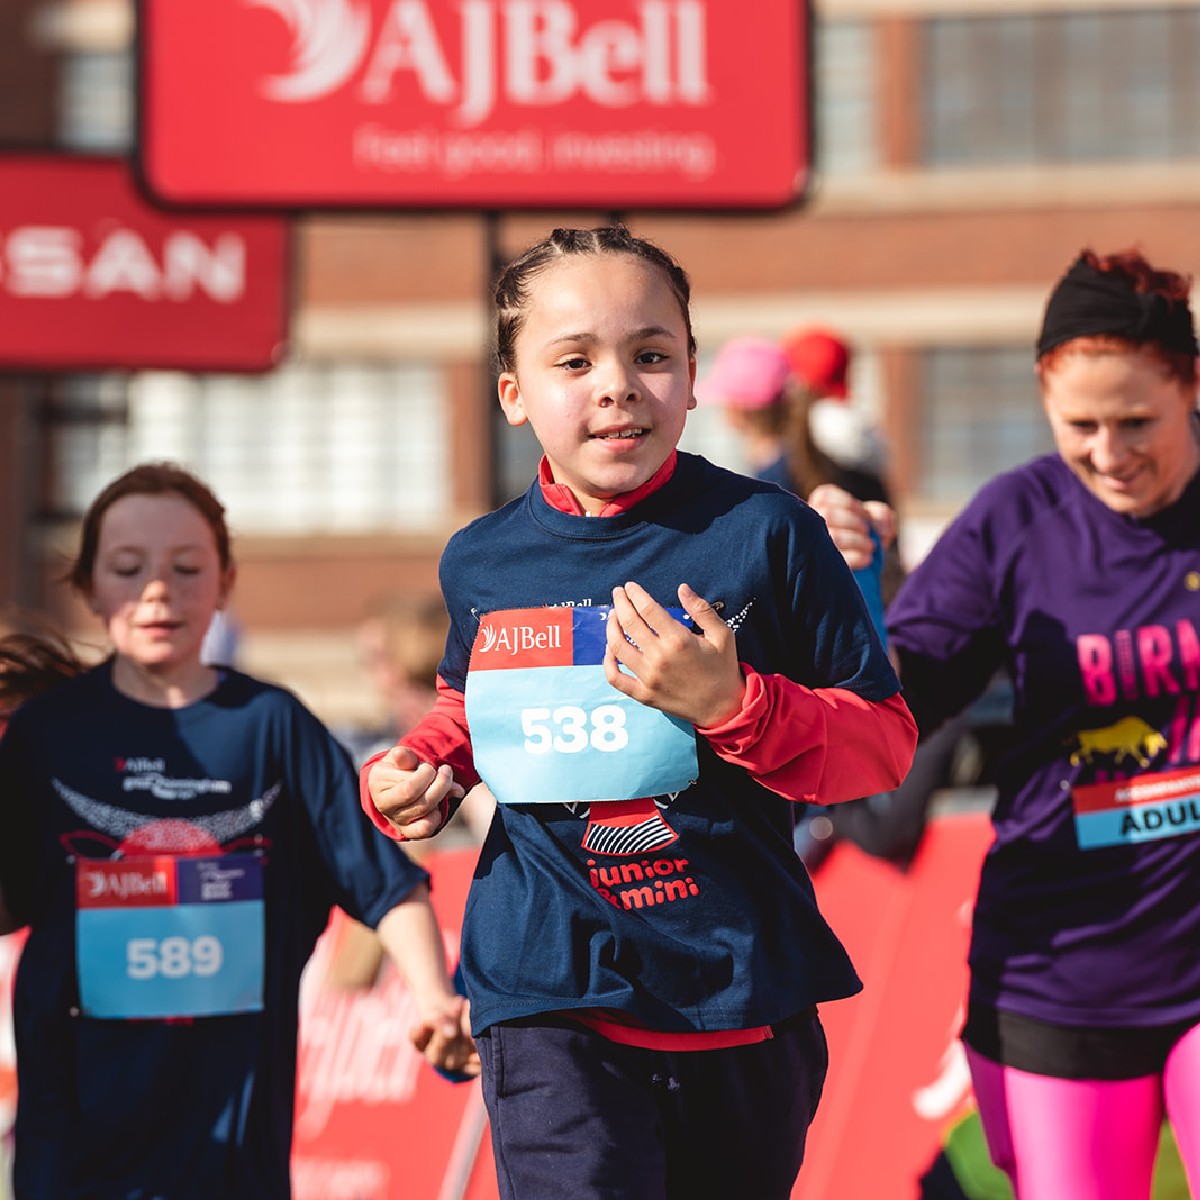 What a SUPER morning we had at the AJ Bell Junior and Mini Great Birmingham Run on Sunday! 😁 This year's theme was 'Finding Your Superpower' and we saw some incredible fancy dress and super strengths in action 🦸‍♂️🦸‍♀️ Share your own photos in the comments below 📸👇